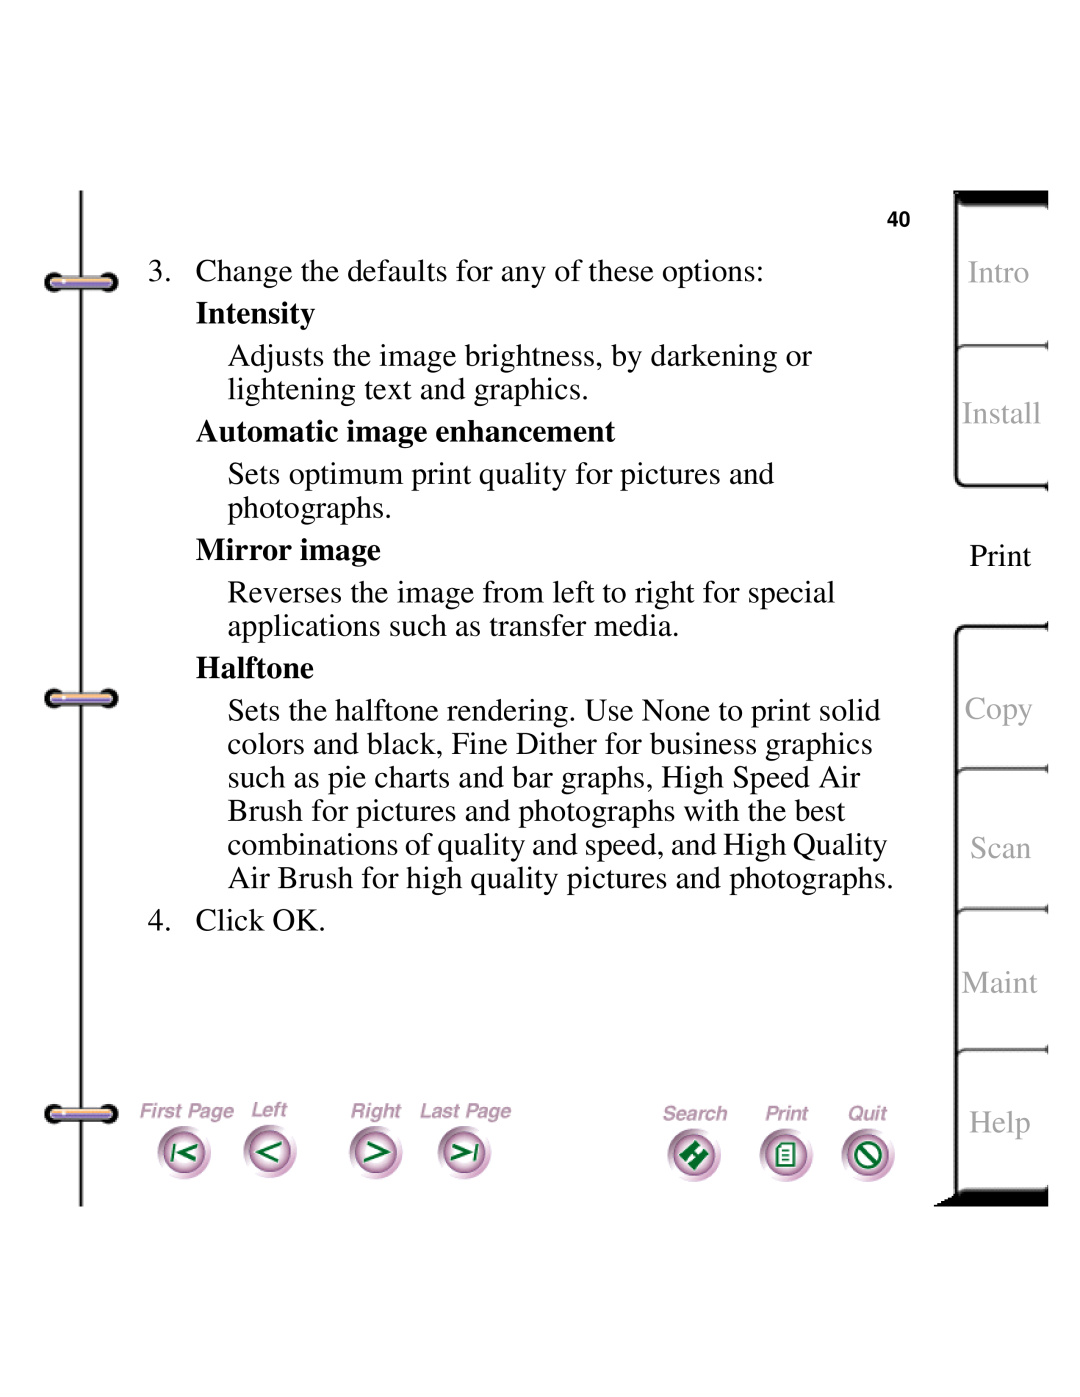 Xerox Document HomeCentre Intro, Change the defaults for any of these options, Intensity, Automatic image enhancement 